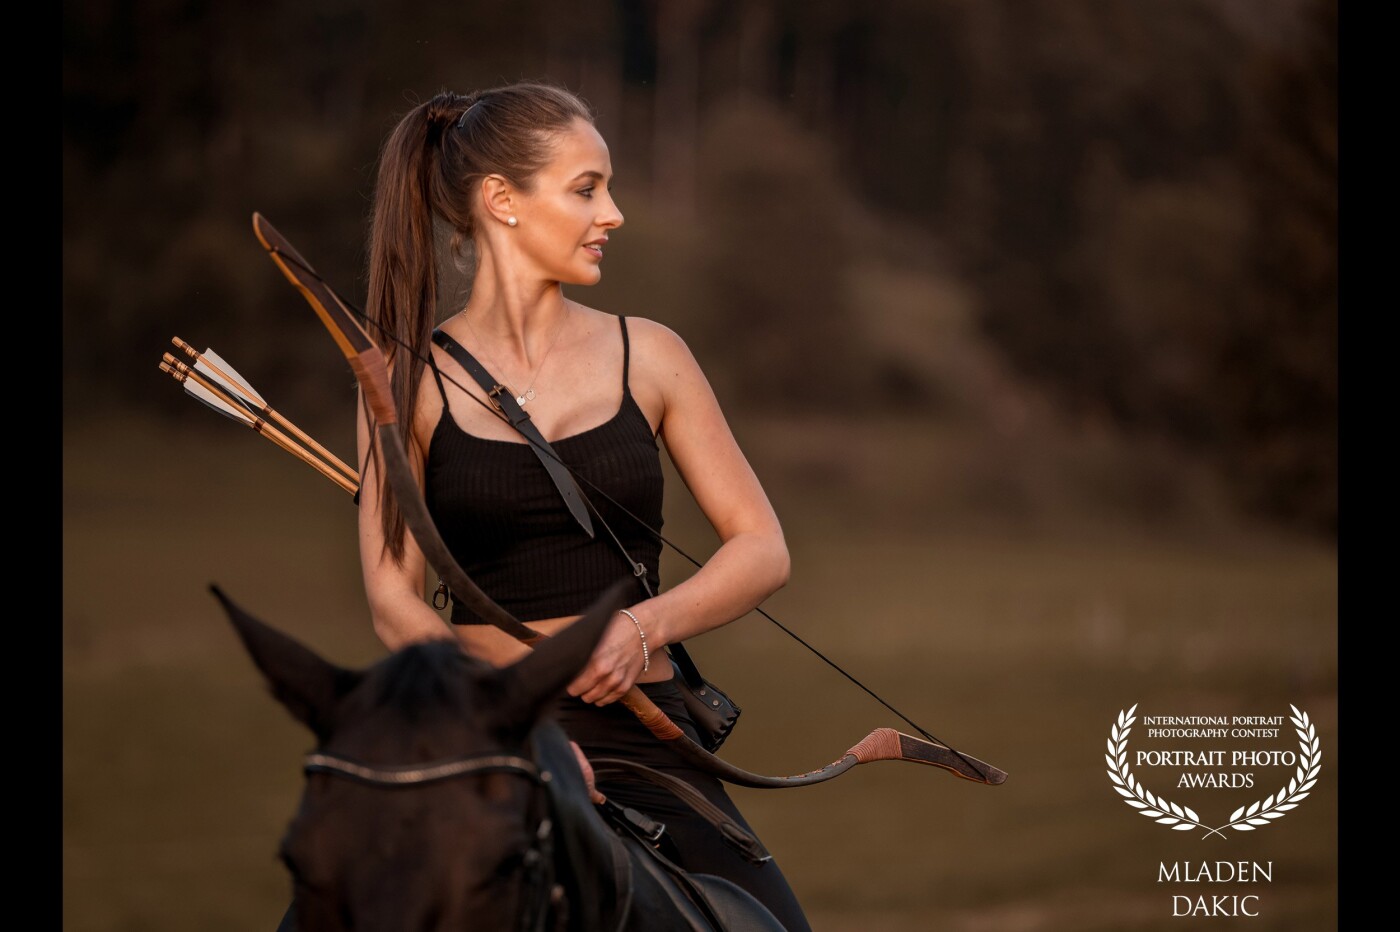 With Stephanie, we had the goal to make some nice huntress style photos in a beautiful sunset light! We tried a lot and as a result, we made a few very nice pictures this evening. Also wed learned, how difficult it is to shoot with animals. I like this picture the most because the model is in the focus and the horse plays a minor role. I called it "Huntress with a bow".<br />
Only the nice evening sunset light was used.